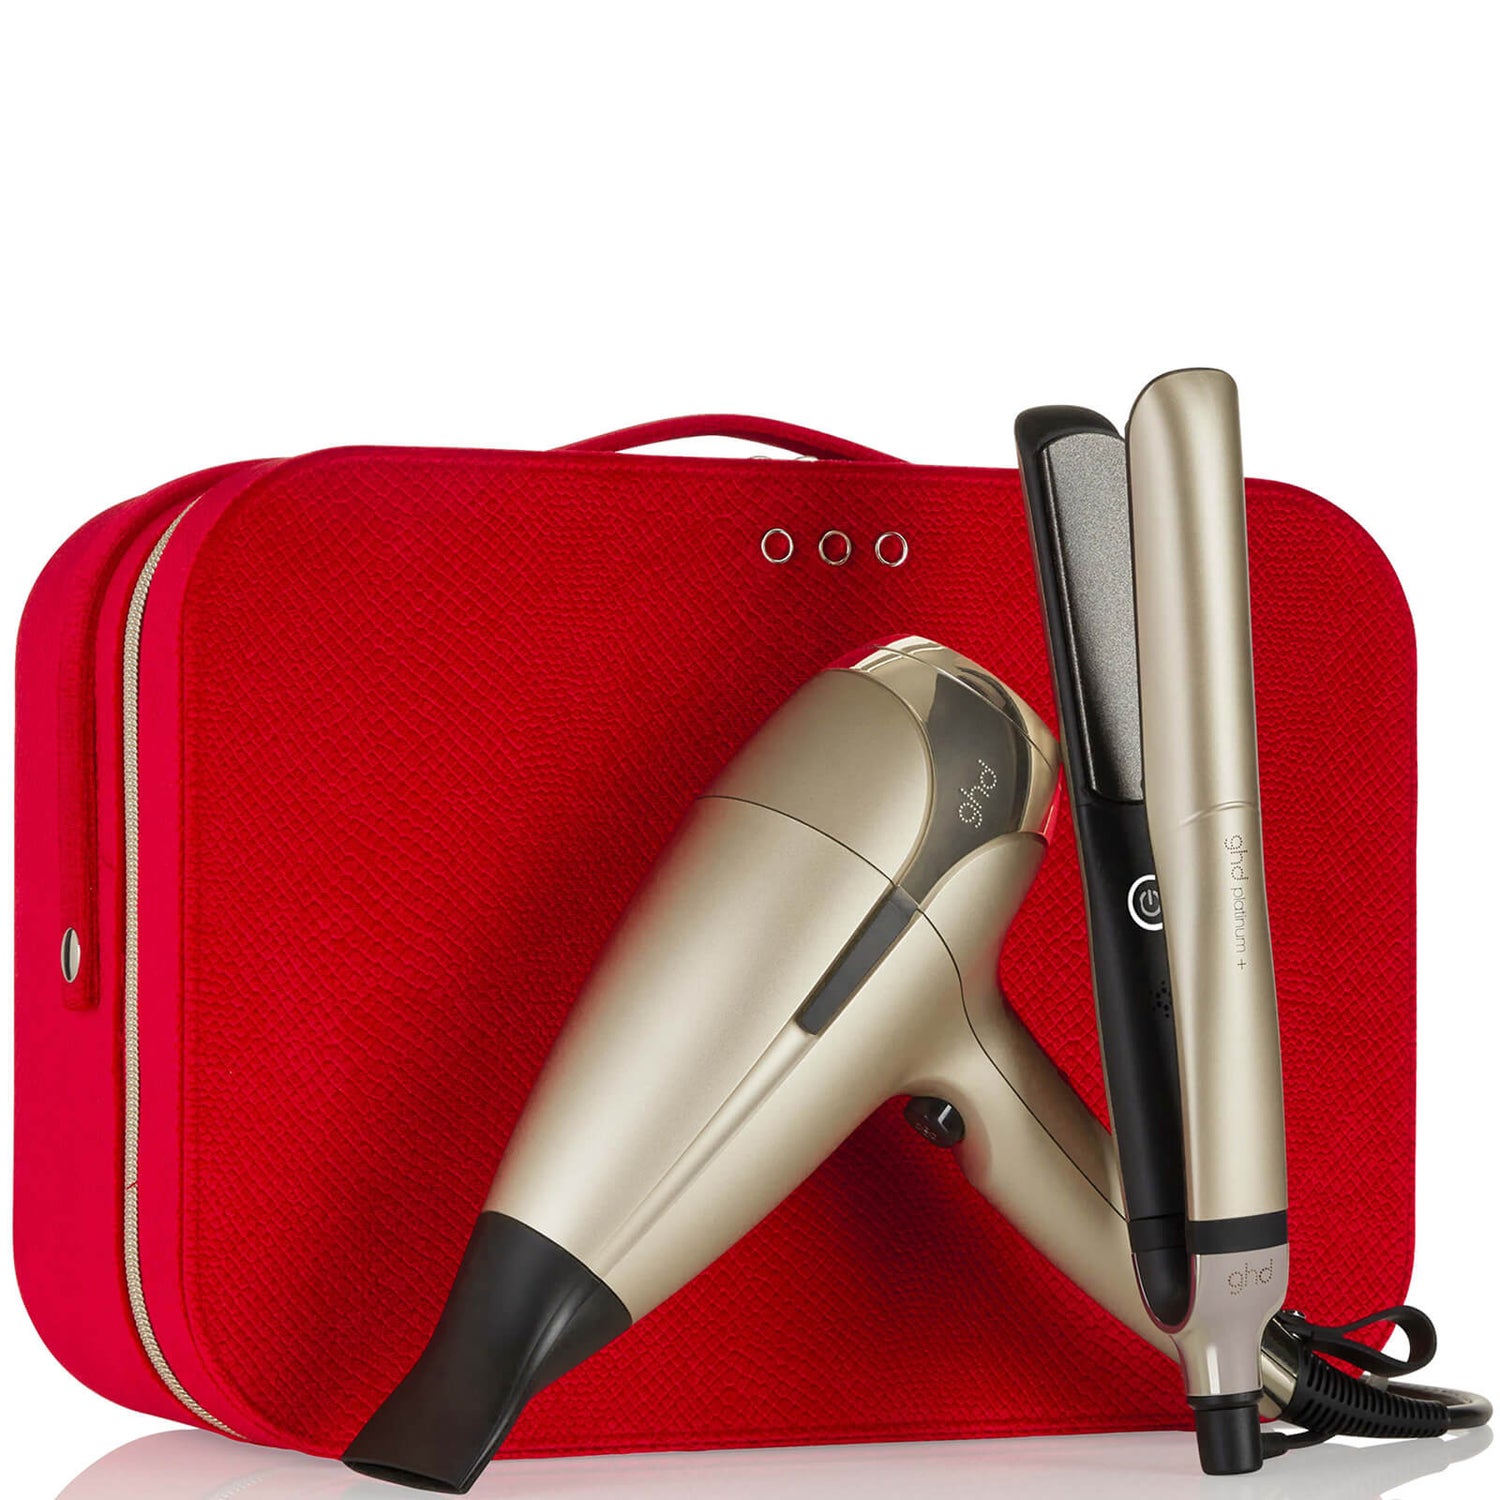 Best Hair Dryer And Straightener Set | escapeauthority.com